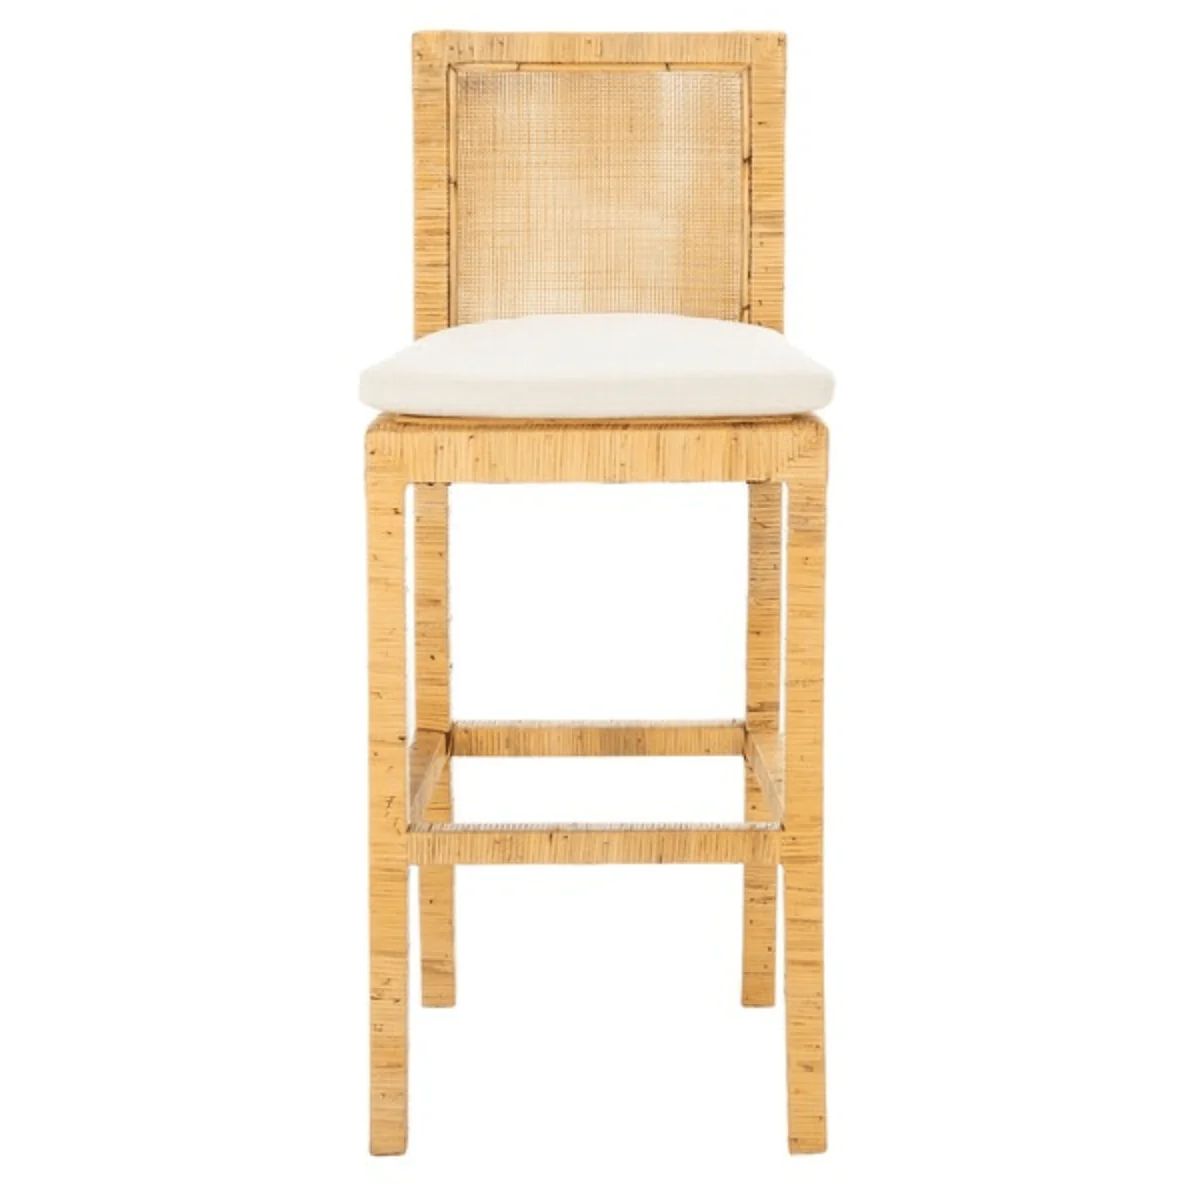 Cane Bar Stool With Cushion | The Well Appointed House, LLC